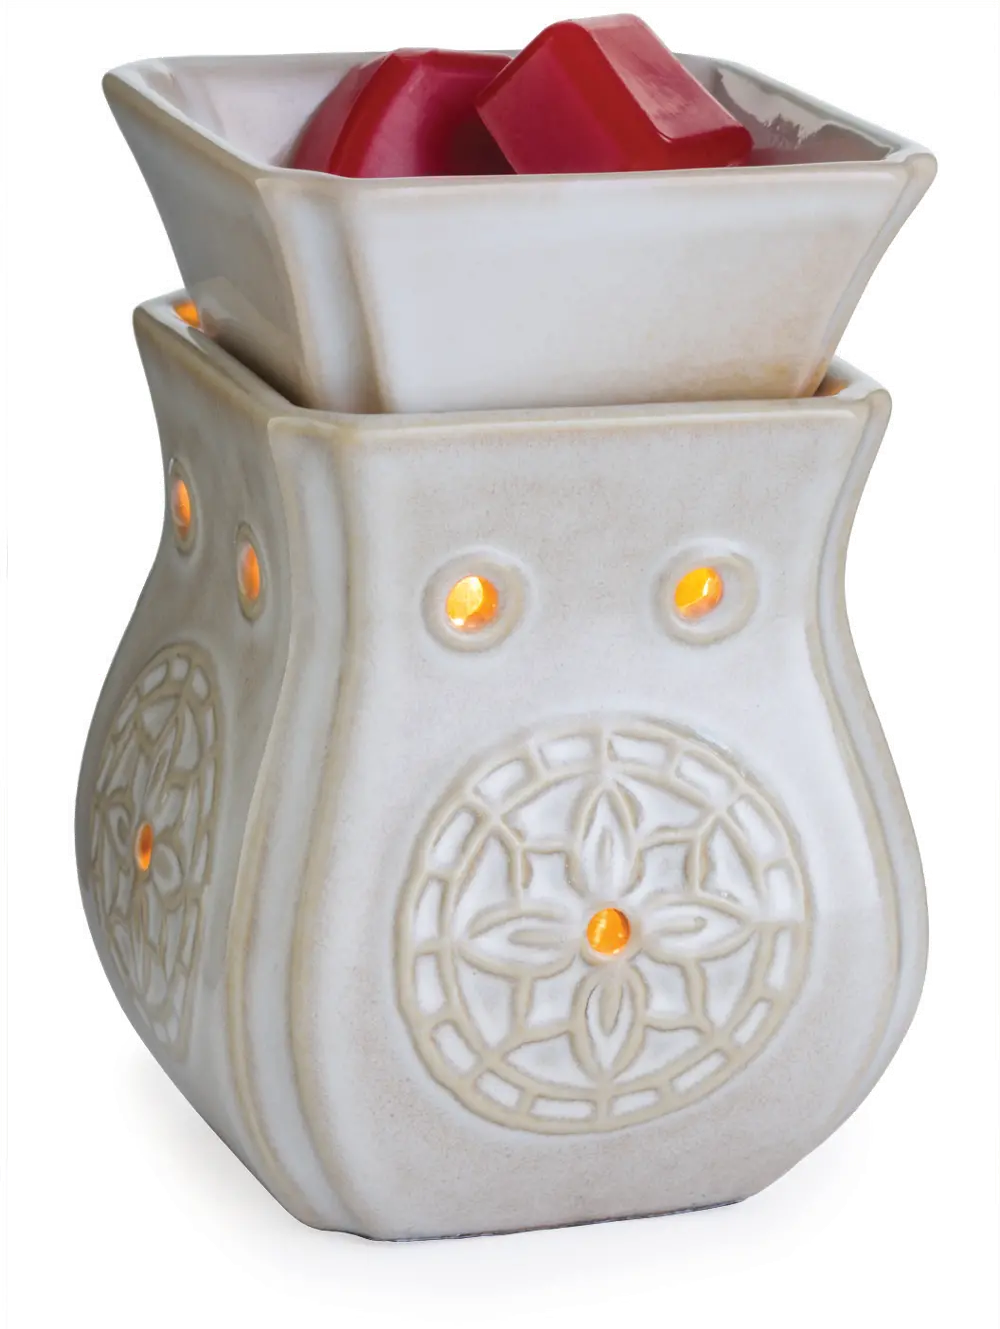 Ivory Insignia Mid-Size Illumination Fragrance Warmer - Candle Warmers-1